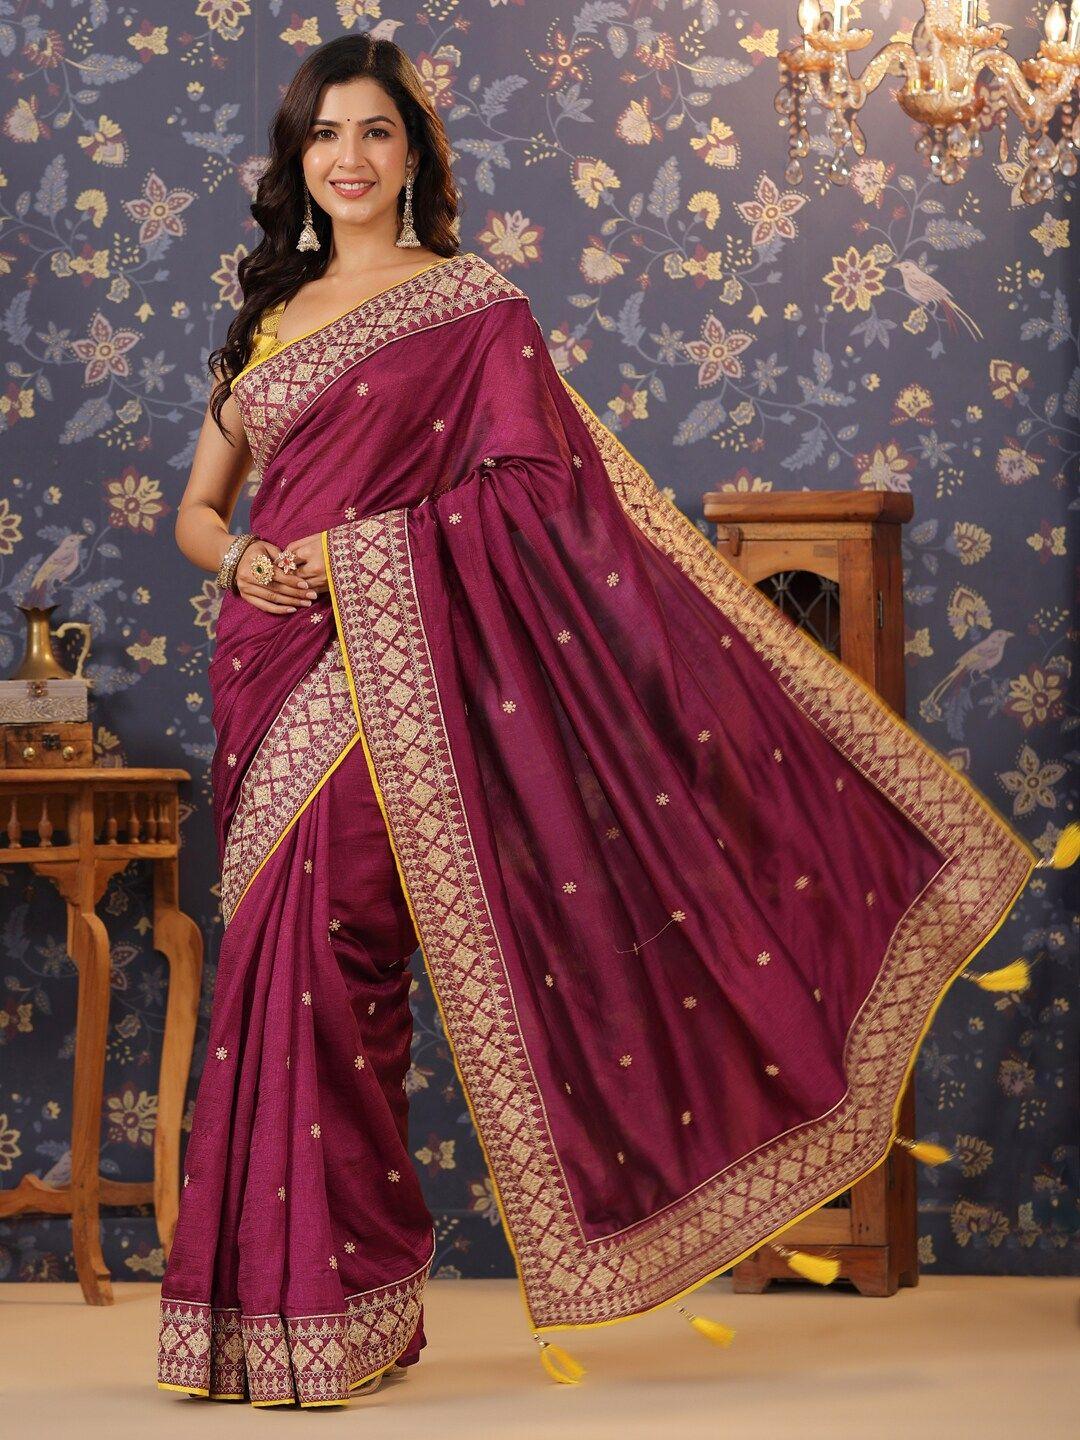 house of pataudi floral embroidered sarees